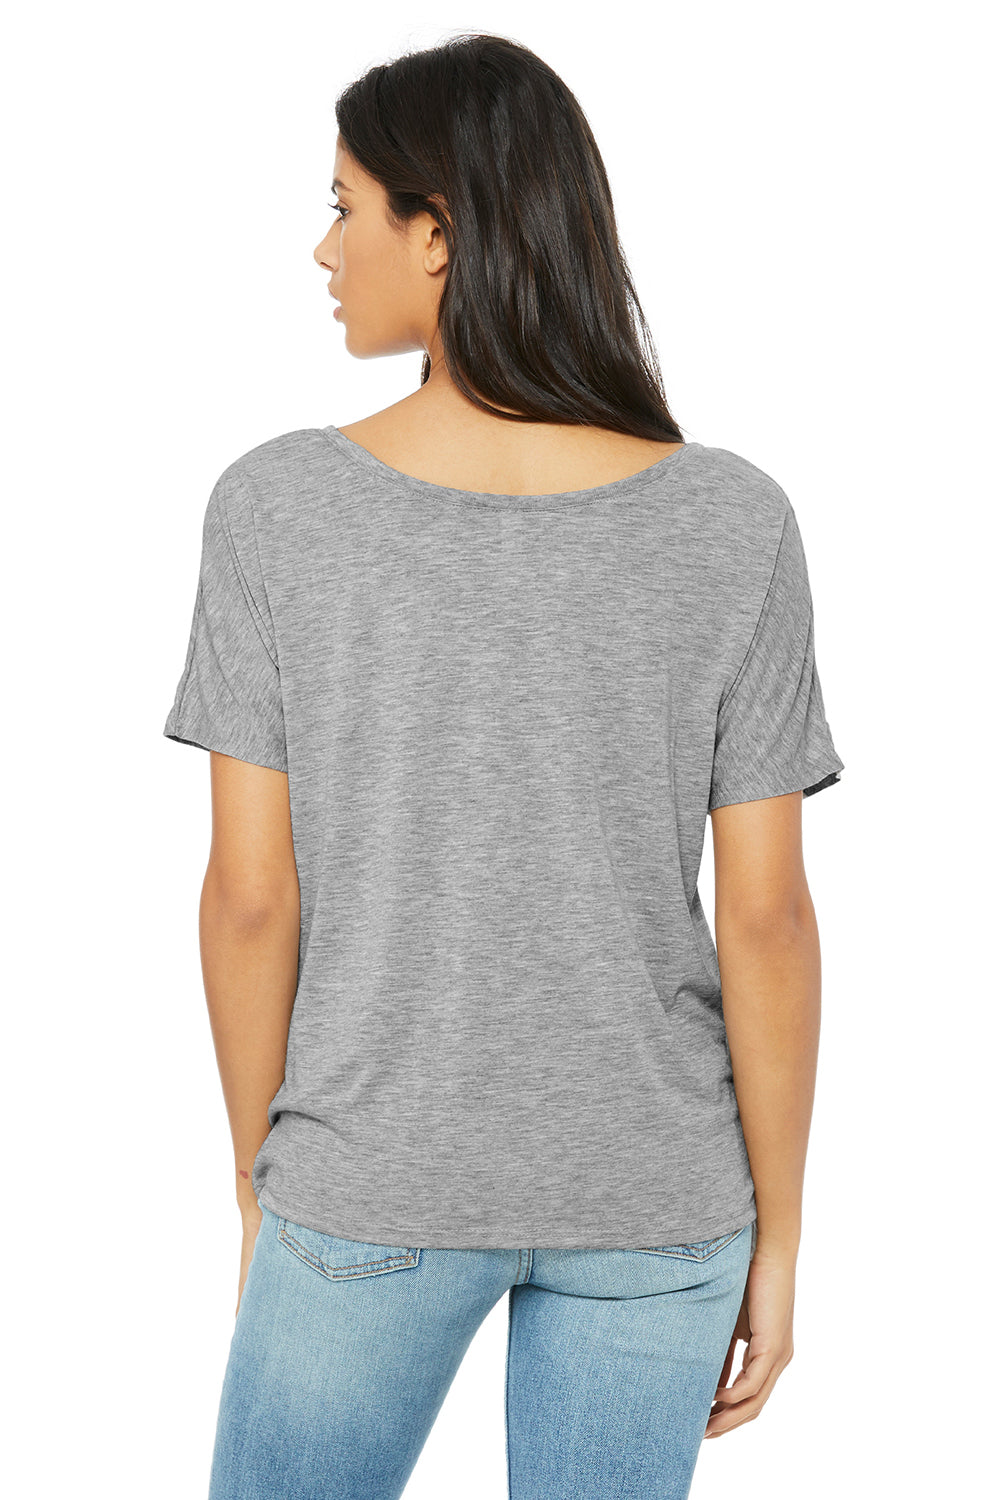 Bella + Canvas BC8816/8816 Womens Slouchy Short Sleeve Wide Neck T-Shirt Heather Grey Model Back